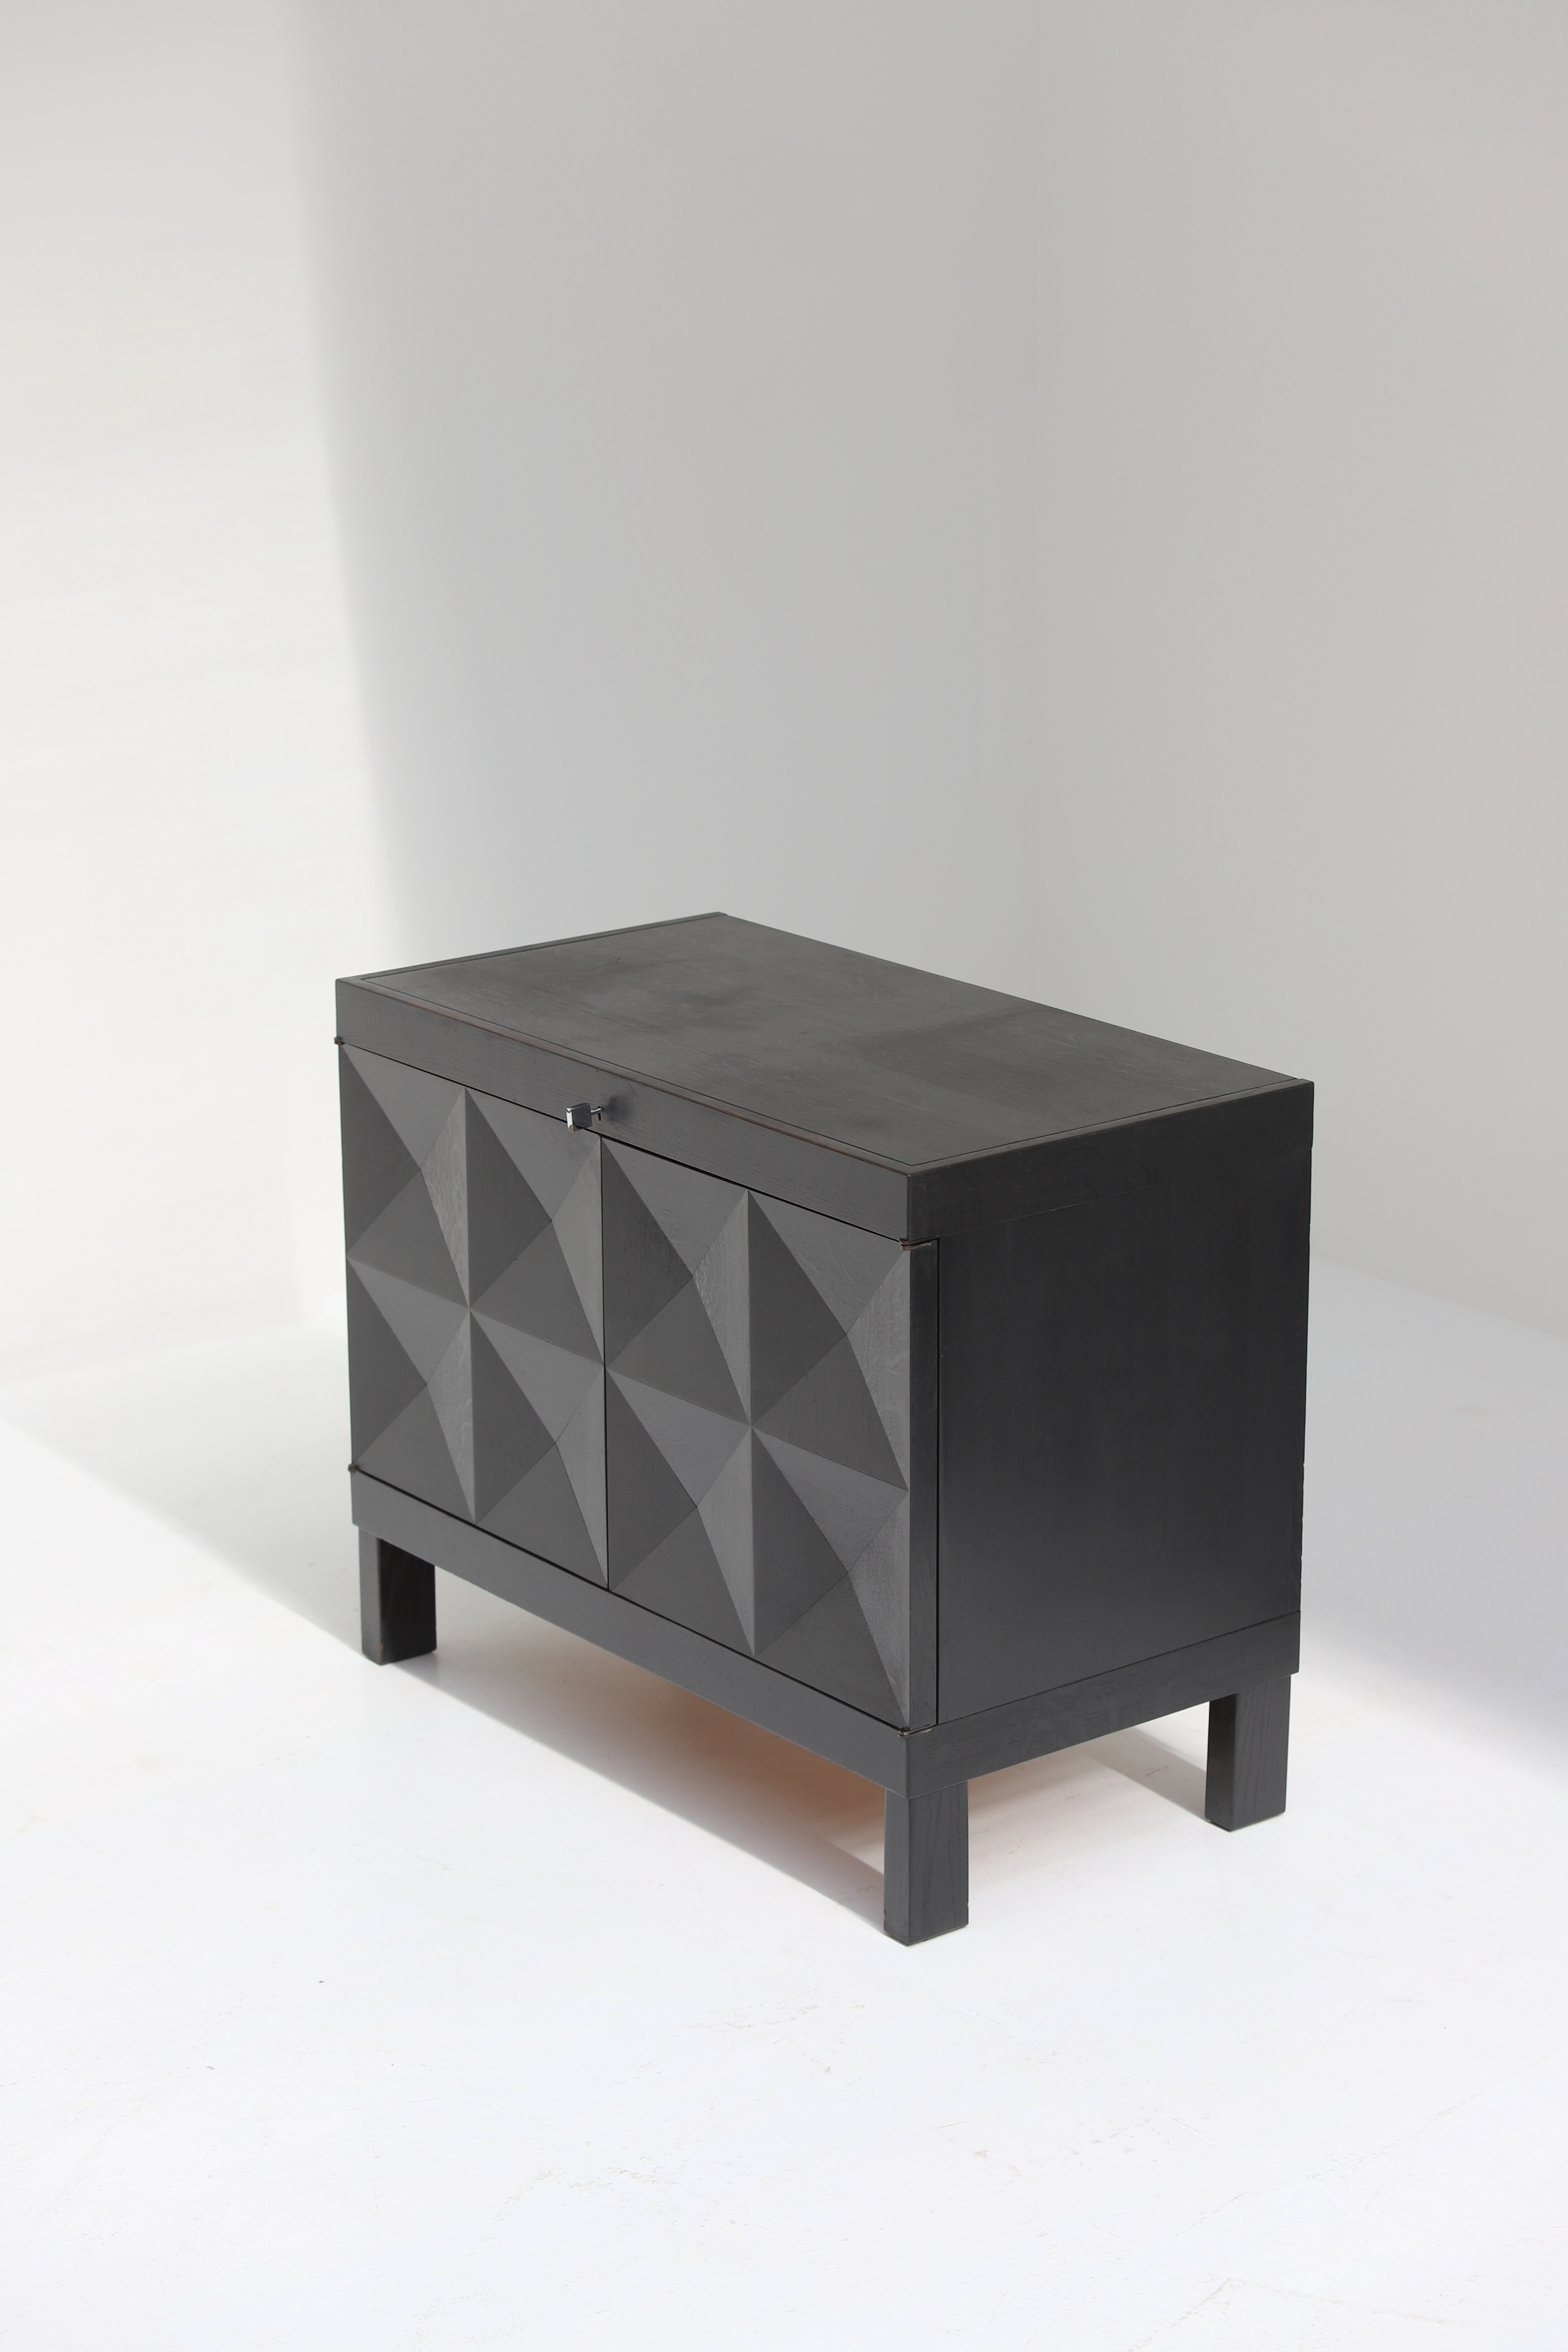 quality crafted cabinet with op-art doors designed by J. Batenburg for MI, Belgium 1969.image 12